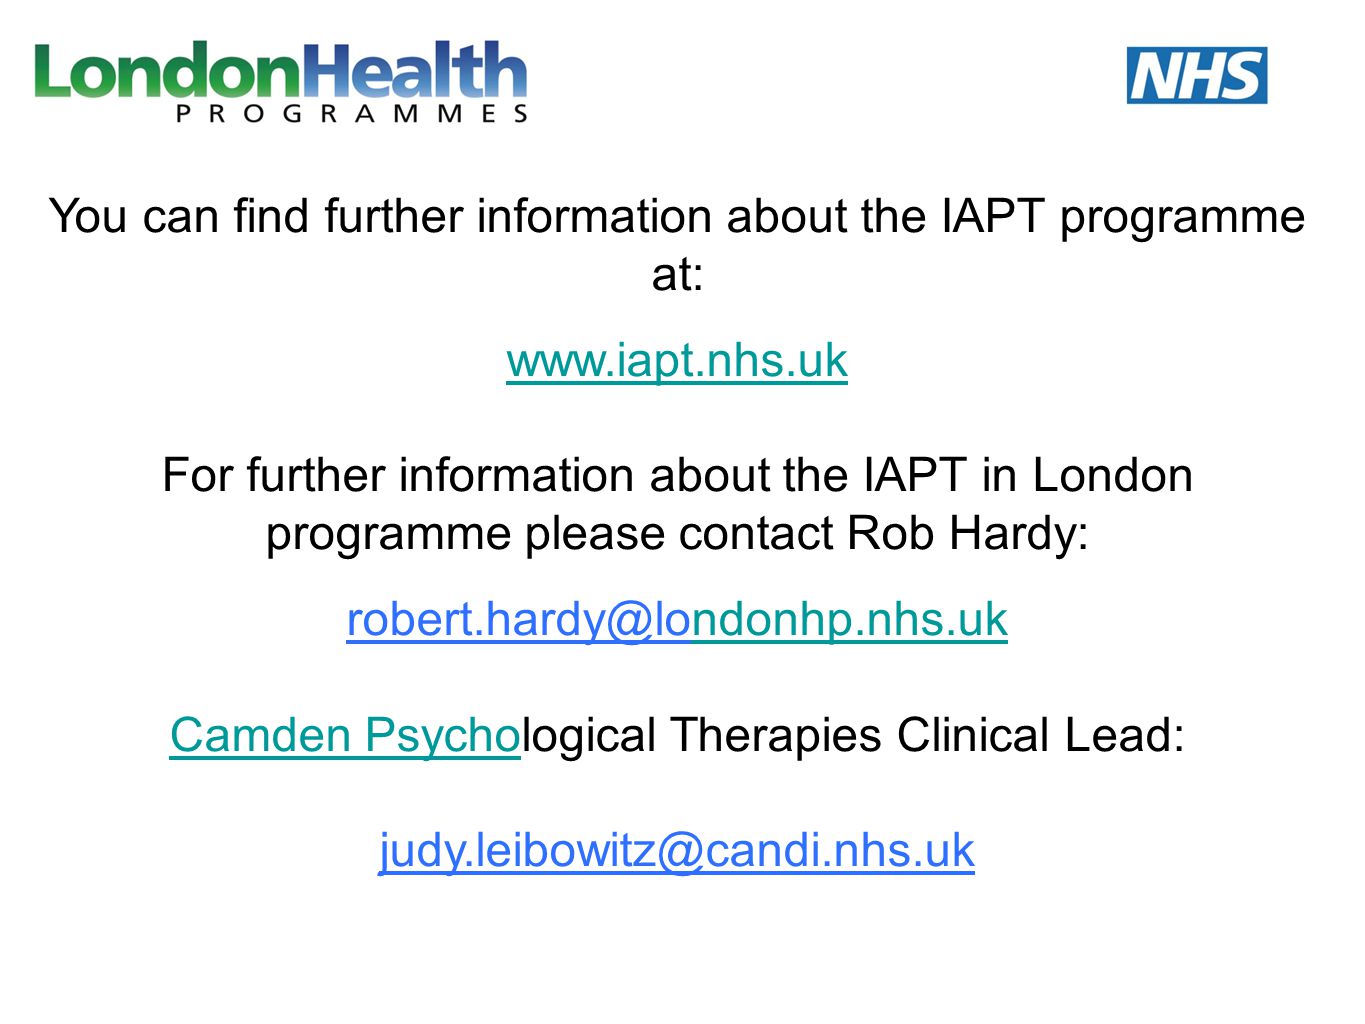 You can find further information about the IAPT programme at: